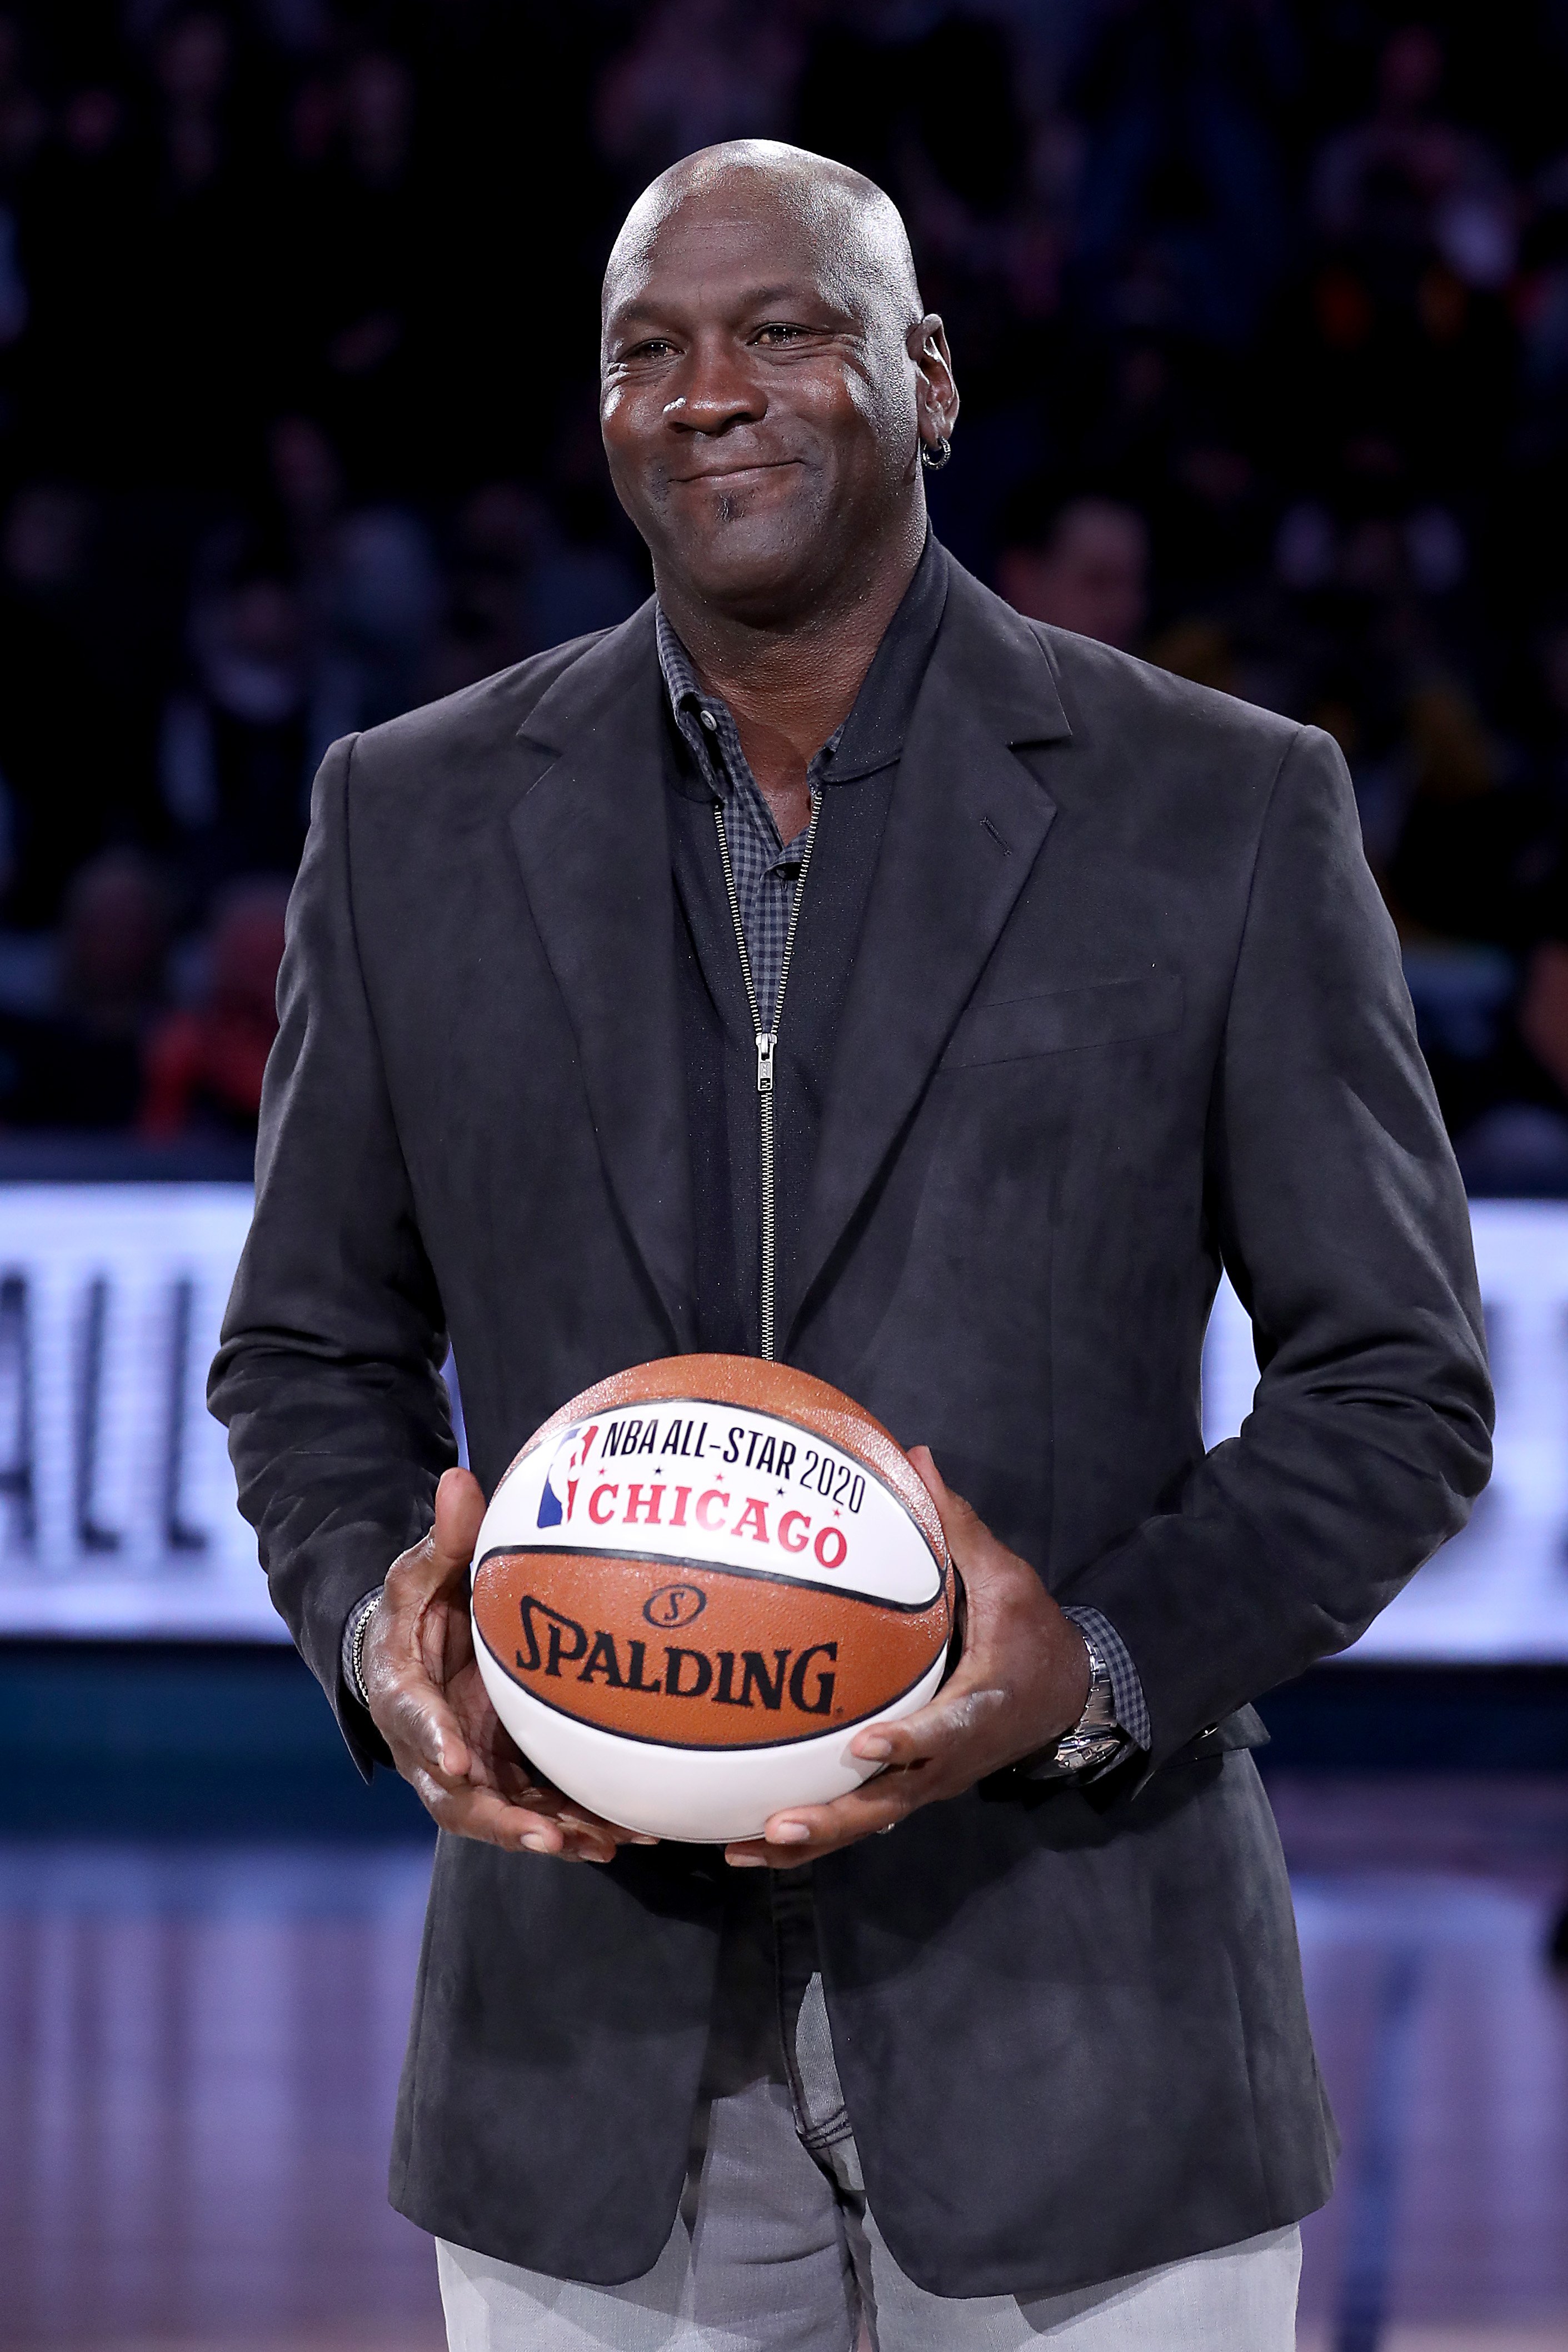  Michael Jordan pictured during the 2019 NBA All-Star Weekend at Spectrum Center on February 17, 2019 in Charlotte, North Carolina. | Source: Getty Images